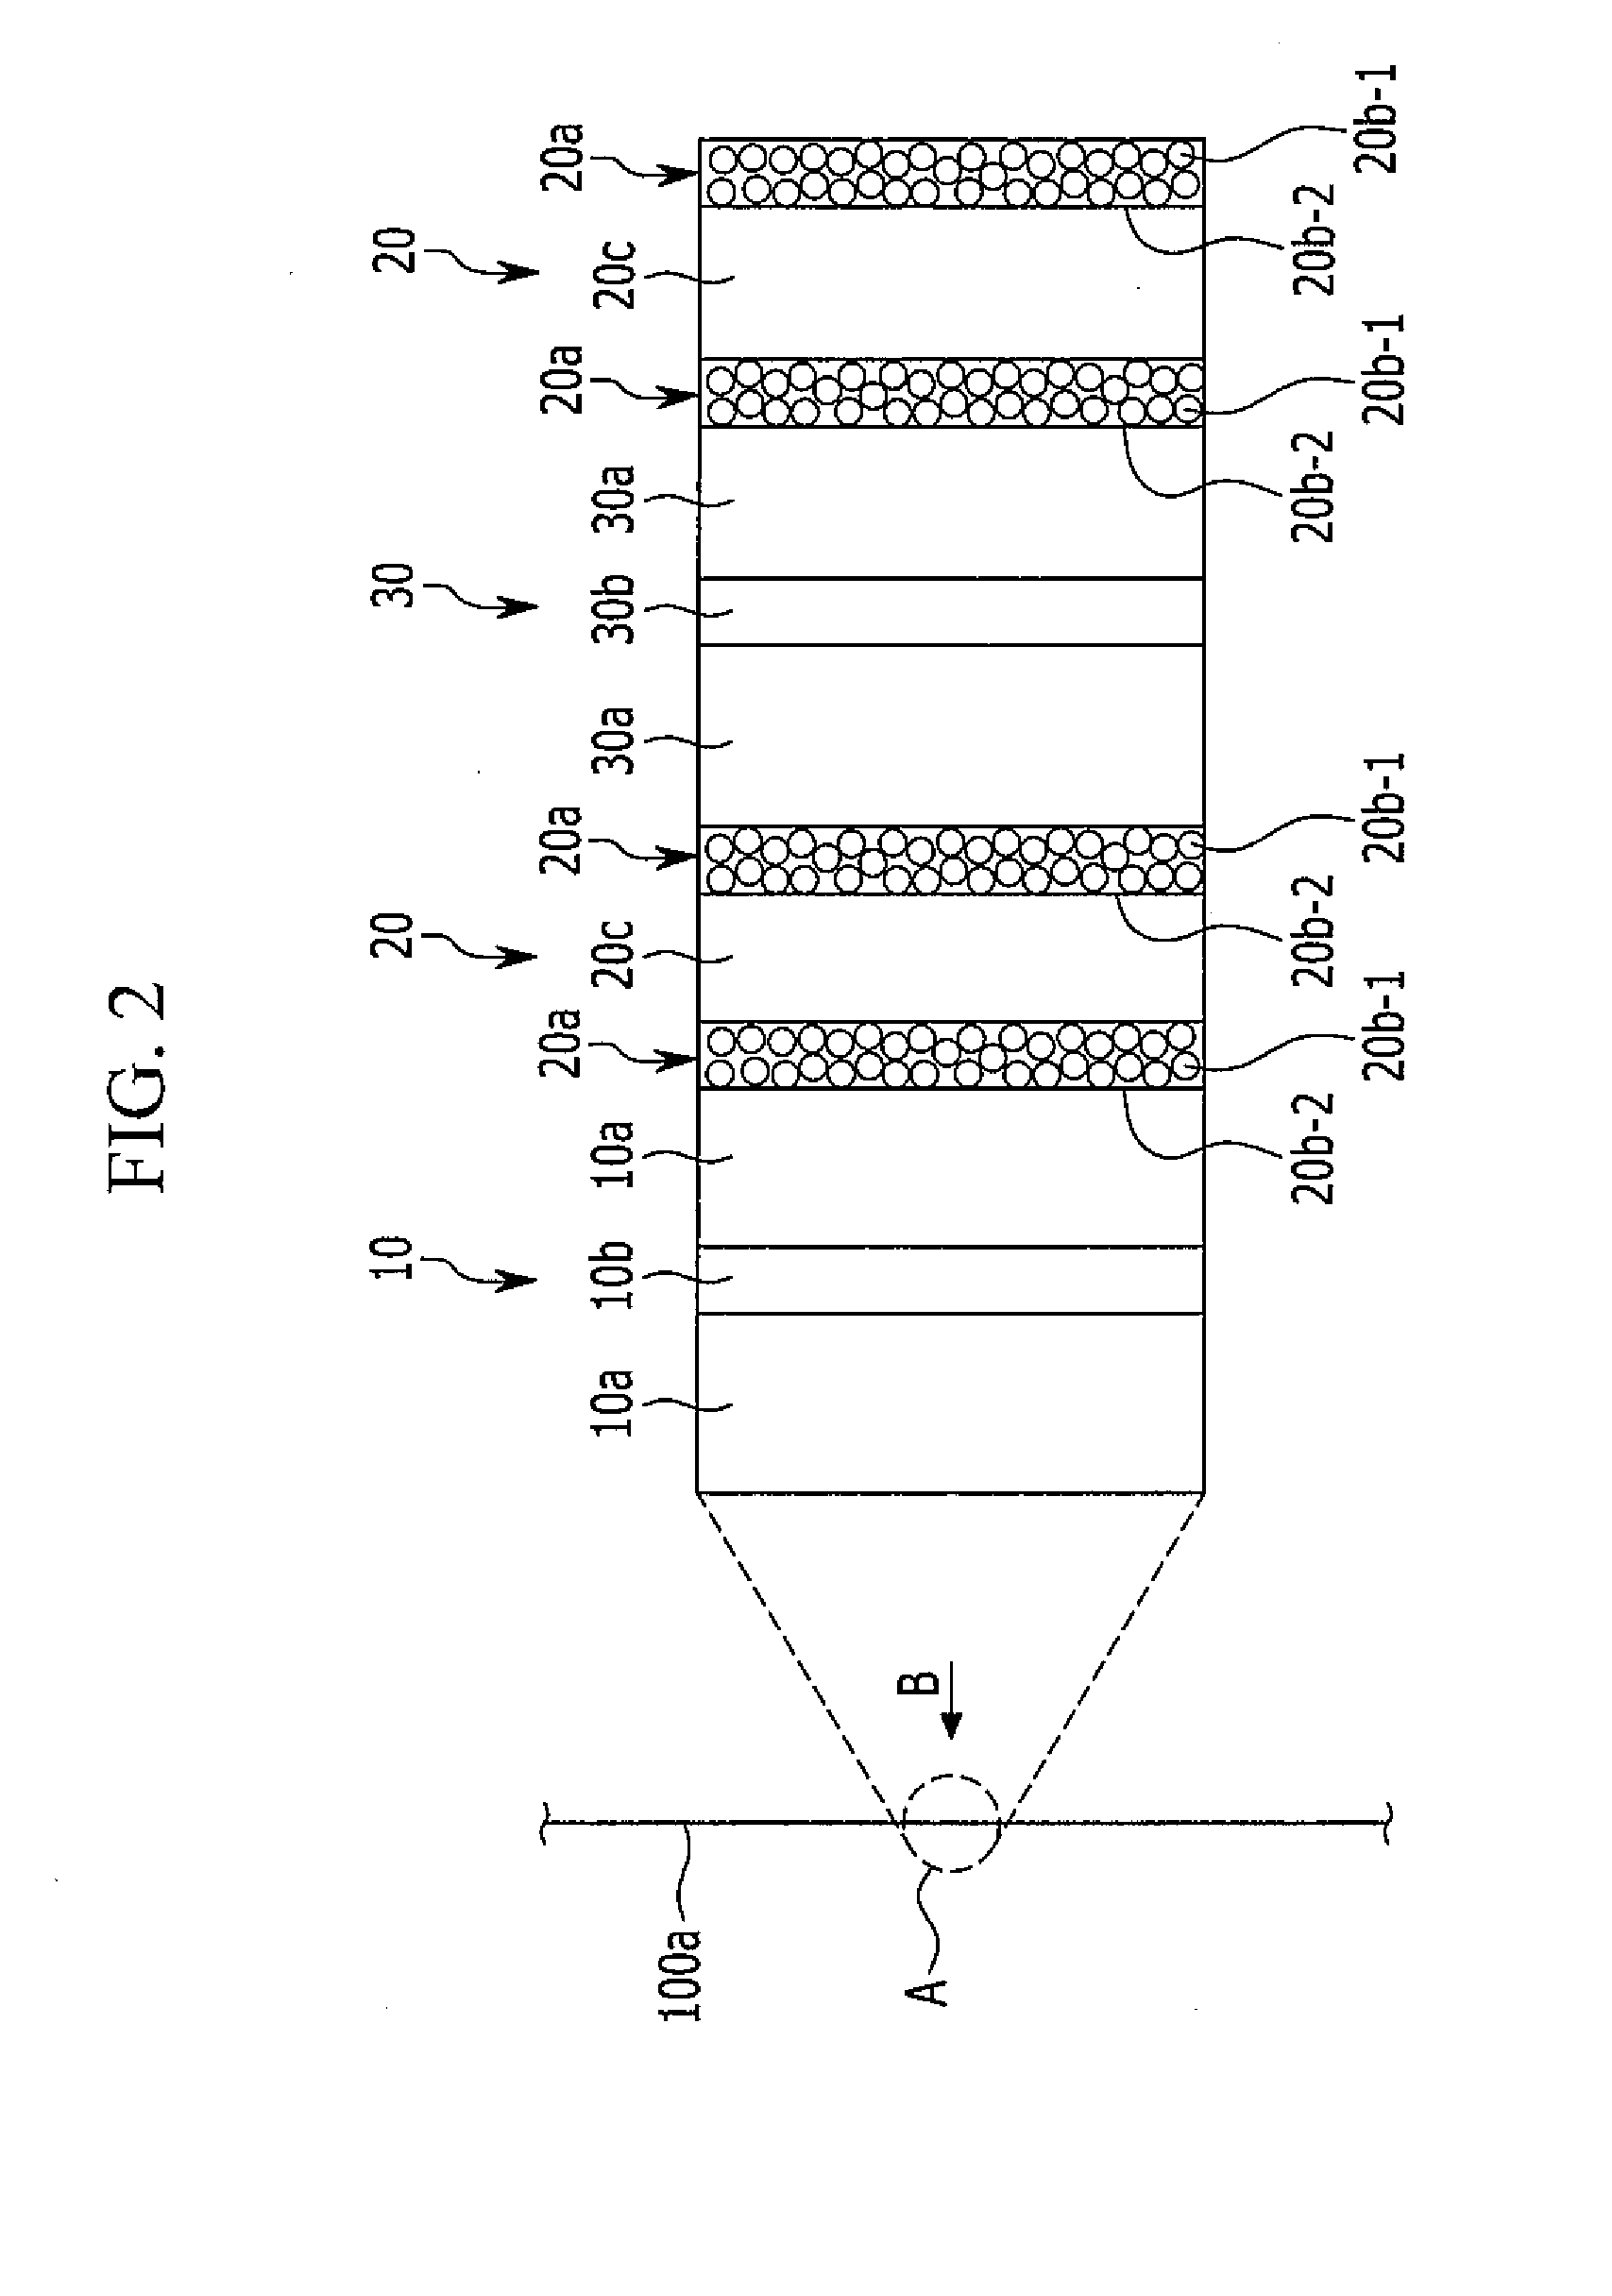 Spirally-wound electrode assembly for rechargeable lithium battery and rechargeable lithium battery including same